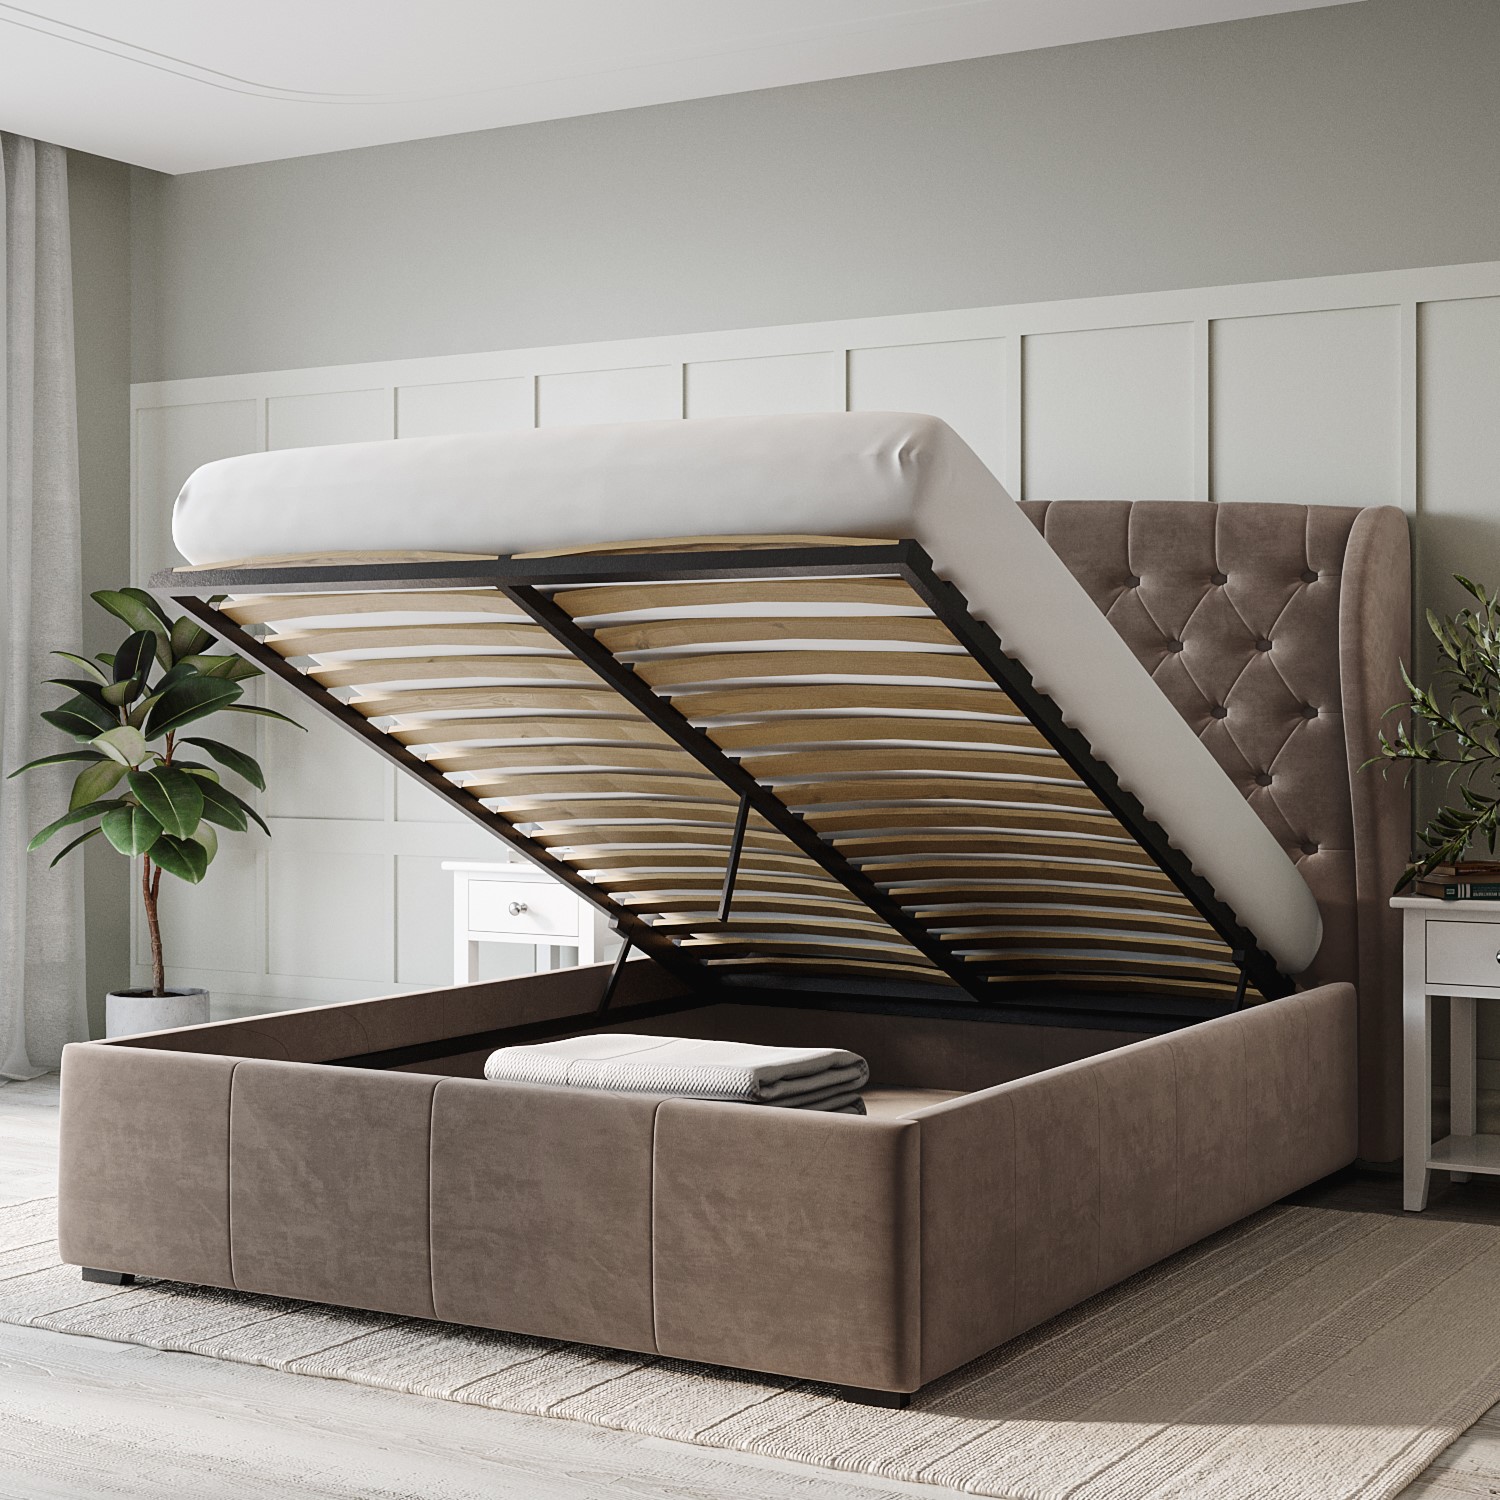 Read more about Mink brown velvet double ottoman bed with winged headboard safina